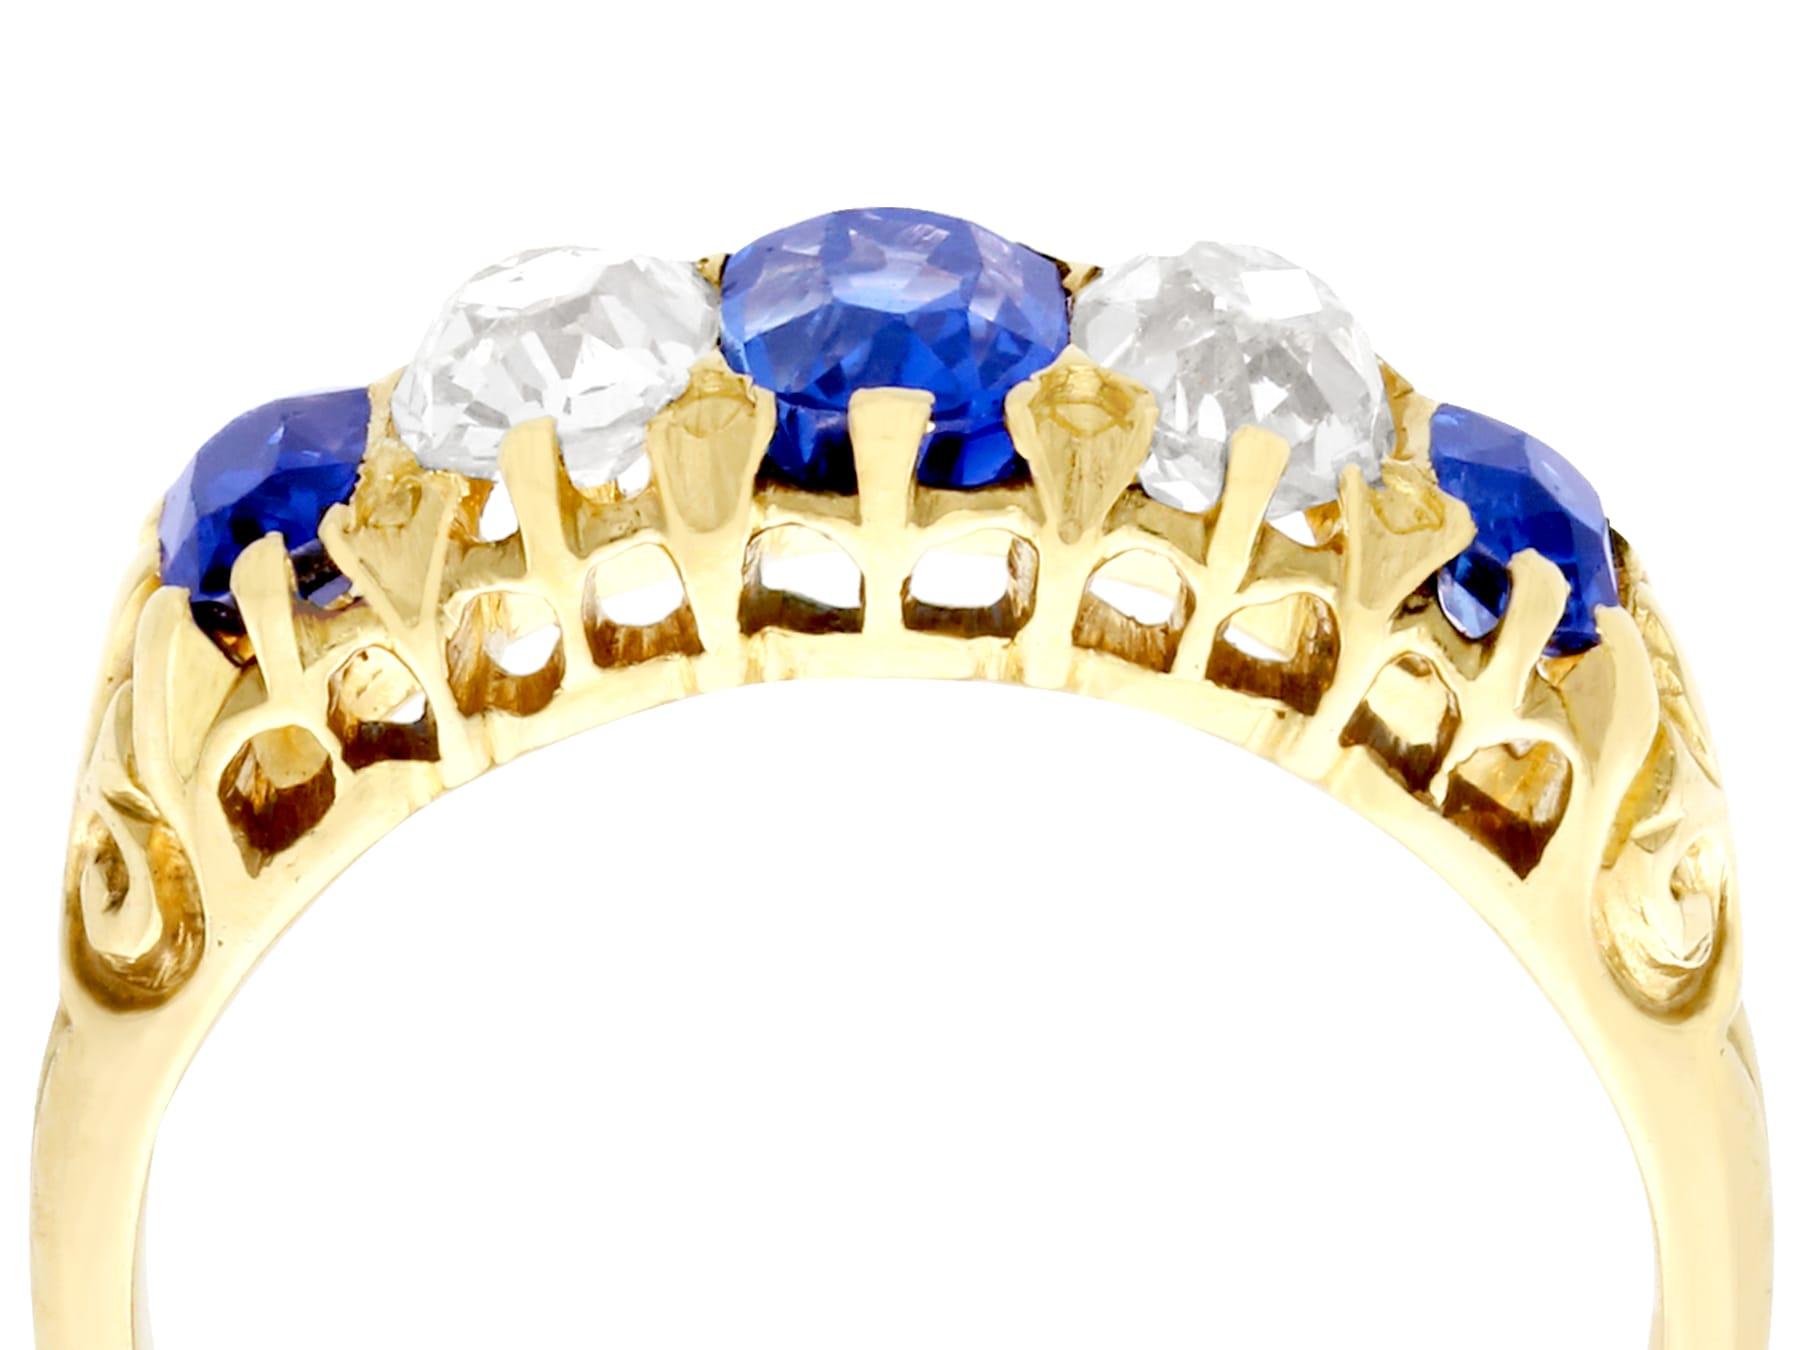 A stunning, fine and impressive 1.05 carat blue sapphire and 0.67 carat diamond, 18 karat yellow gold five stone / dress ring; part of our diverse antique jewelry and estate jewelry collections.

This stunning, fine and impressive Victorian oval cut